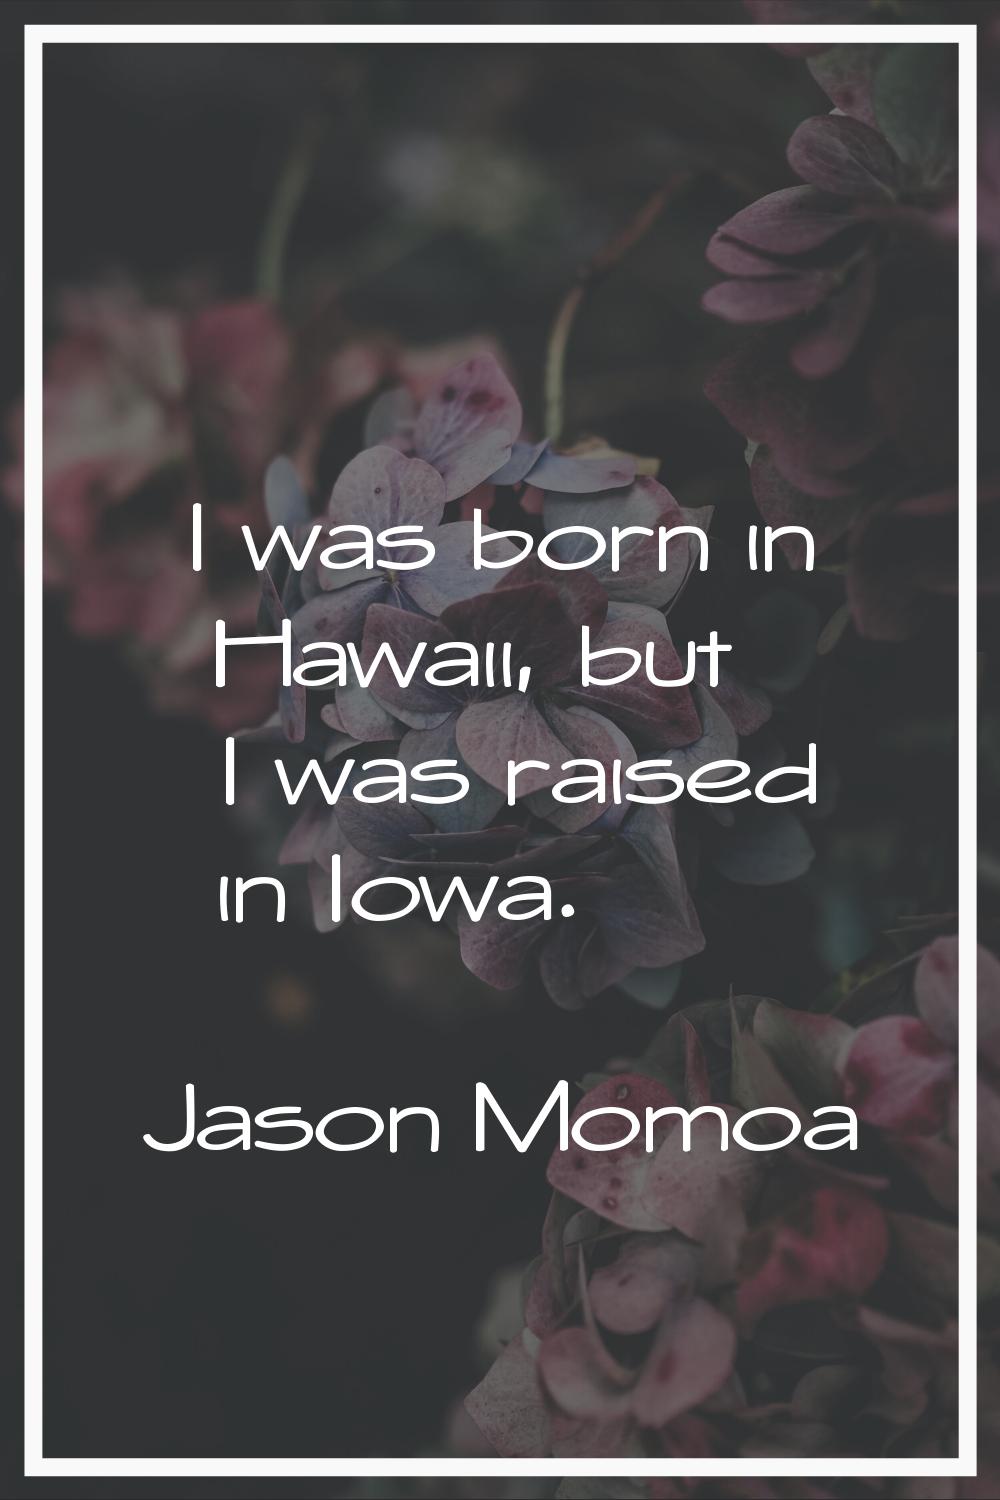 I was born in Hawaii, but I was raised in Iowa.